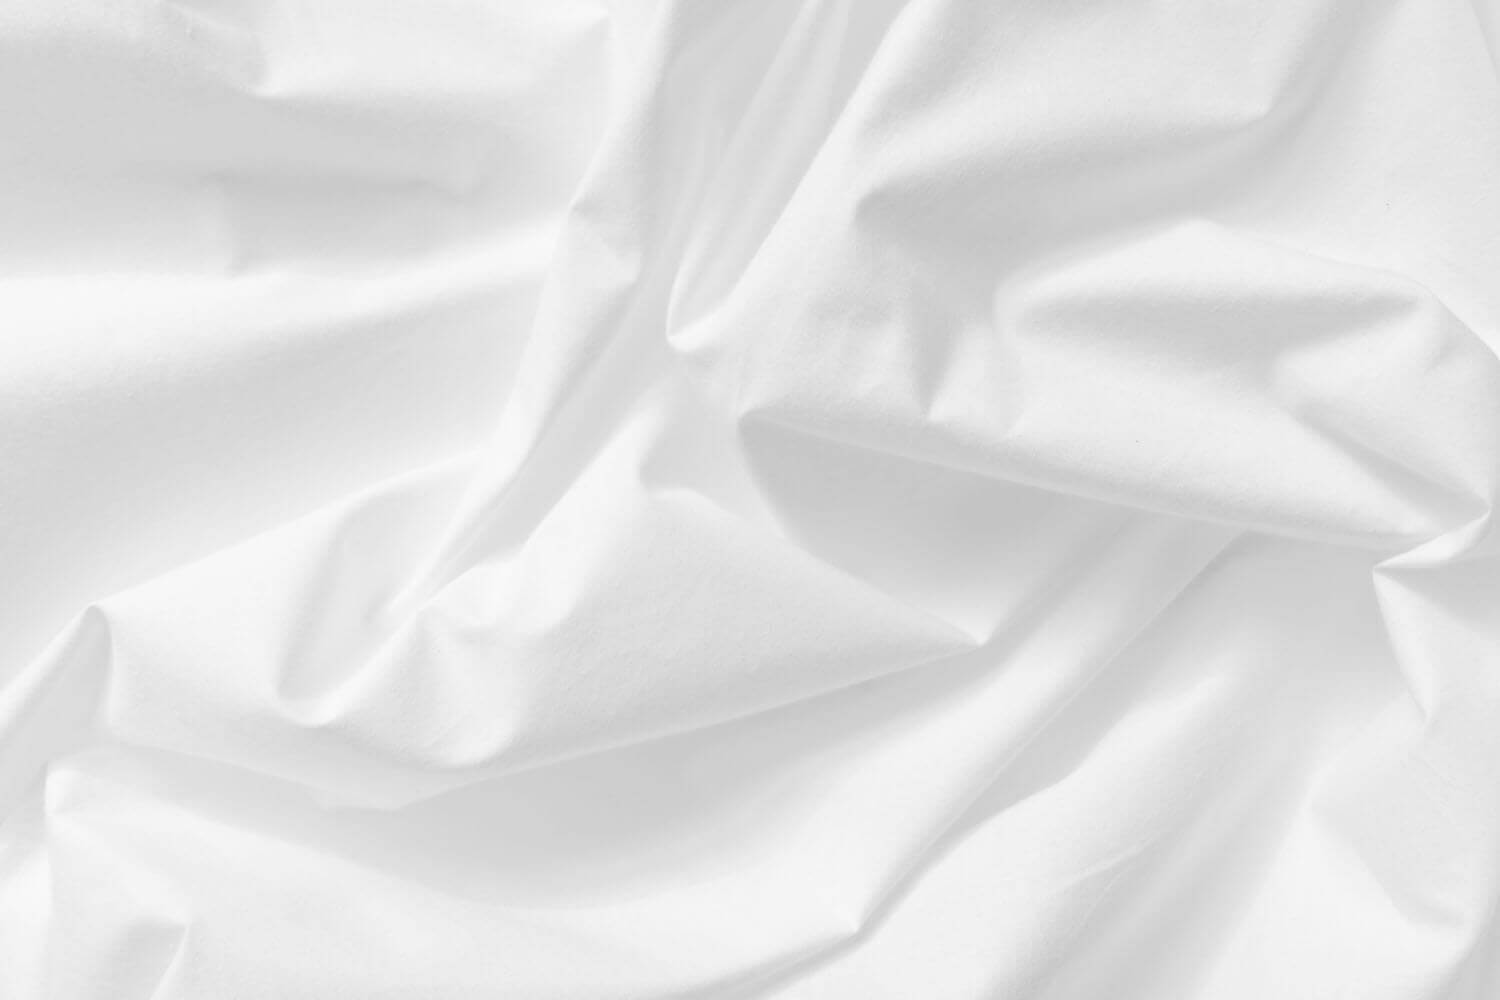 Closeup view of the texture of the Cotton Sheets